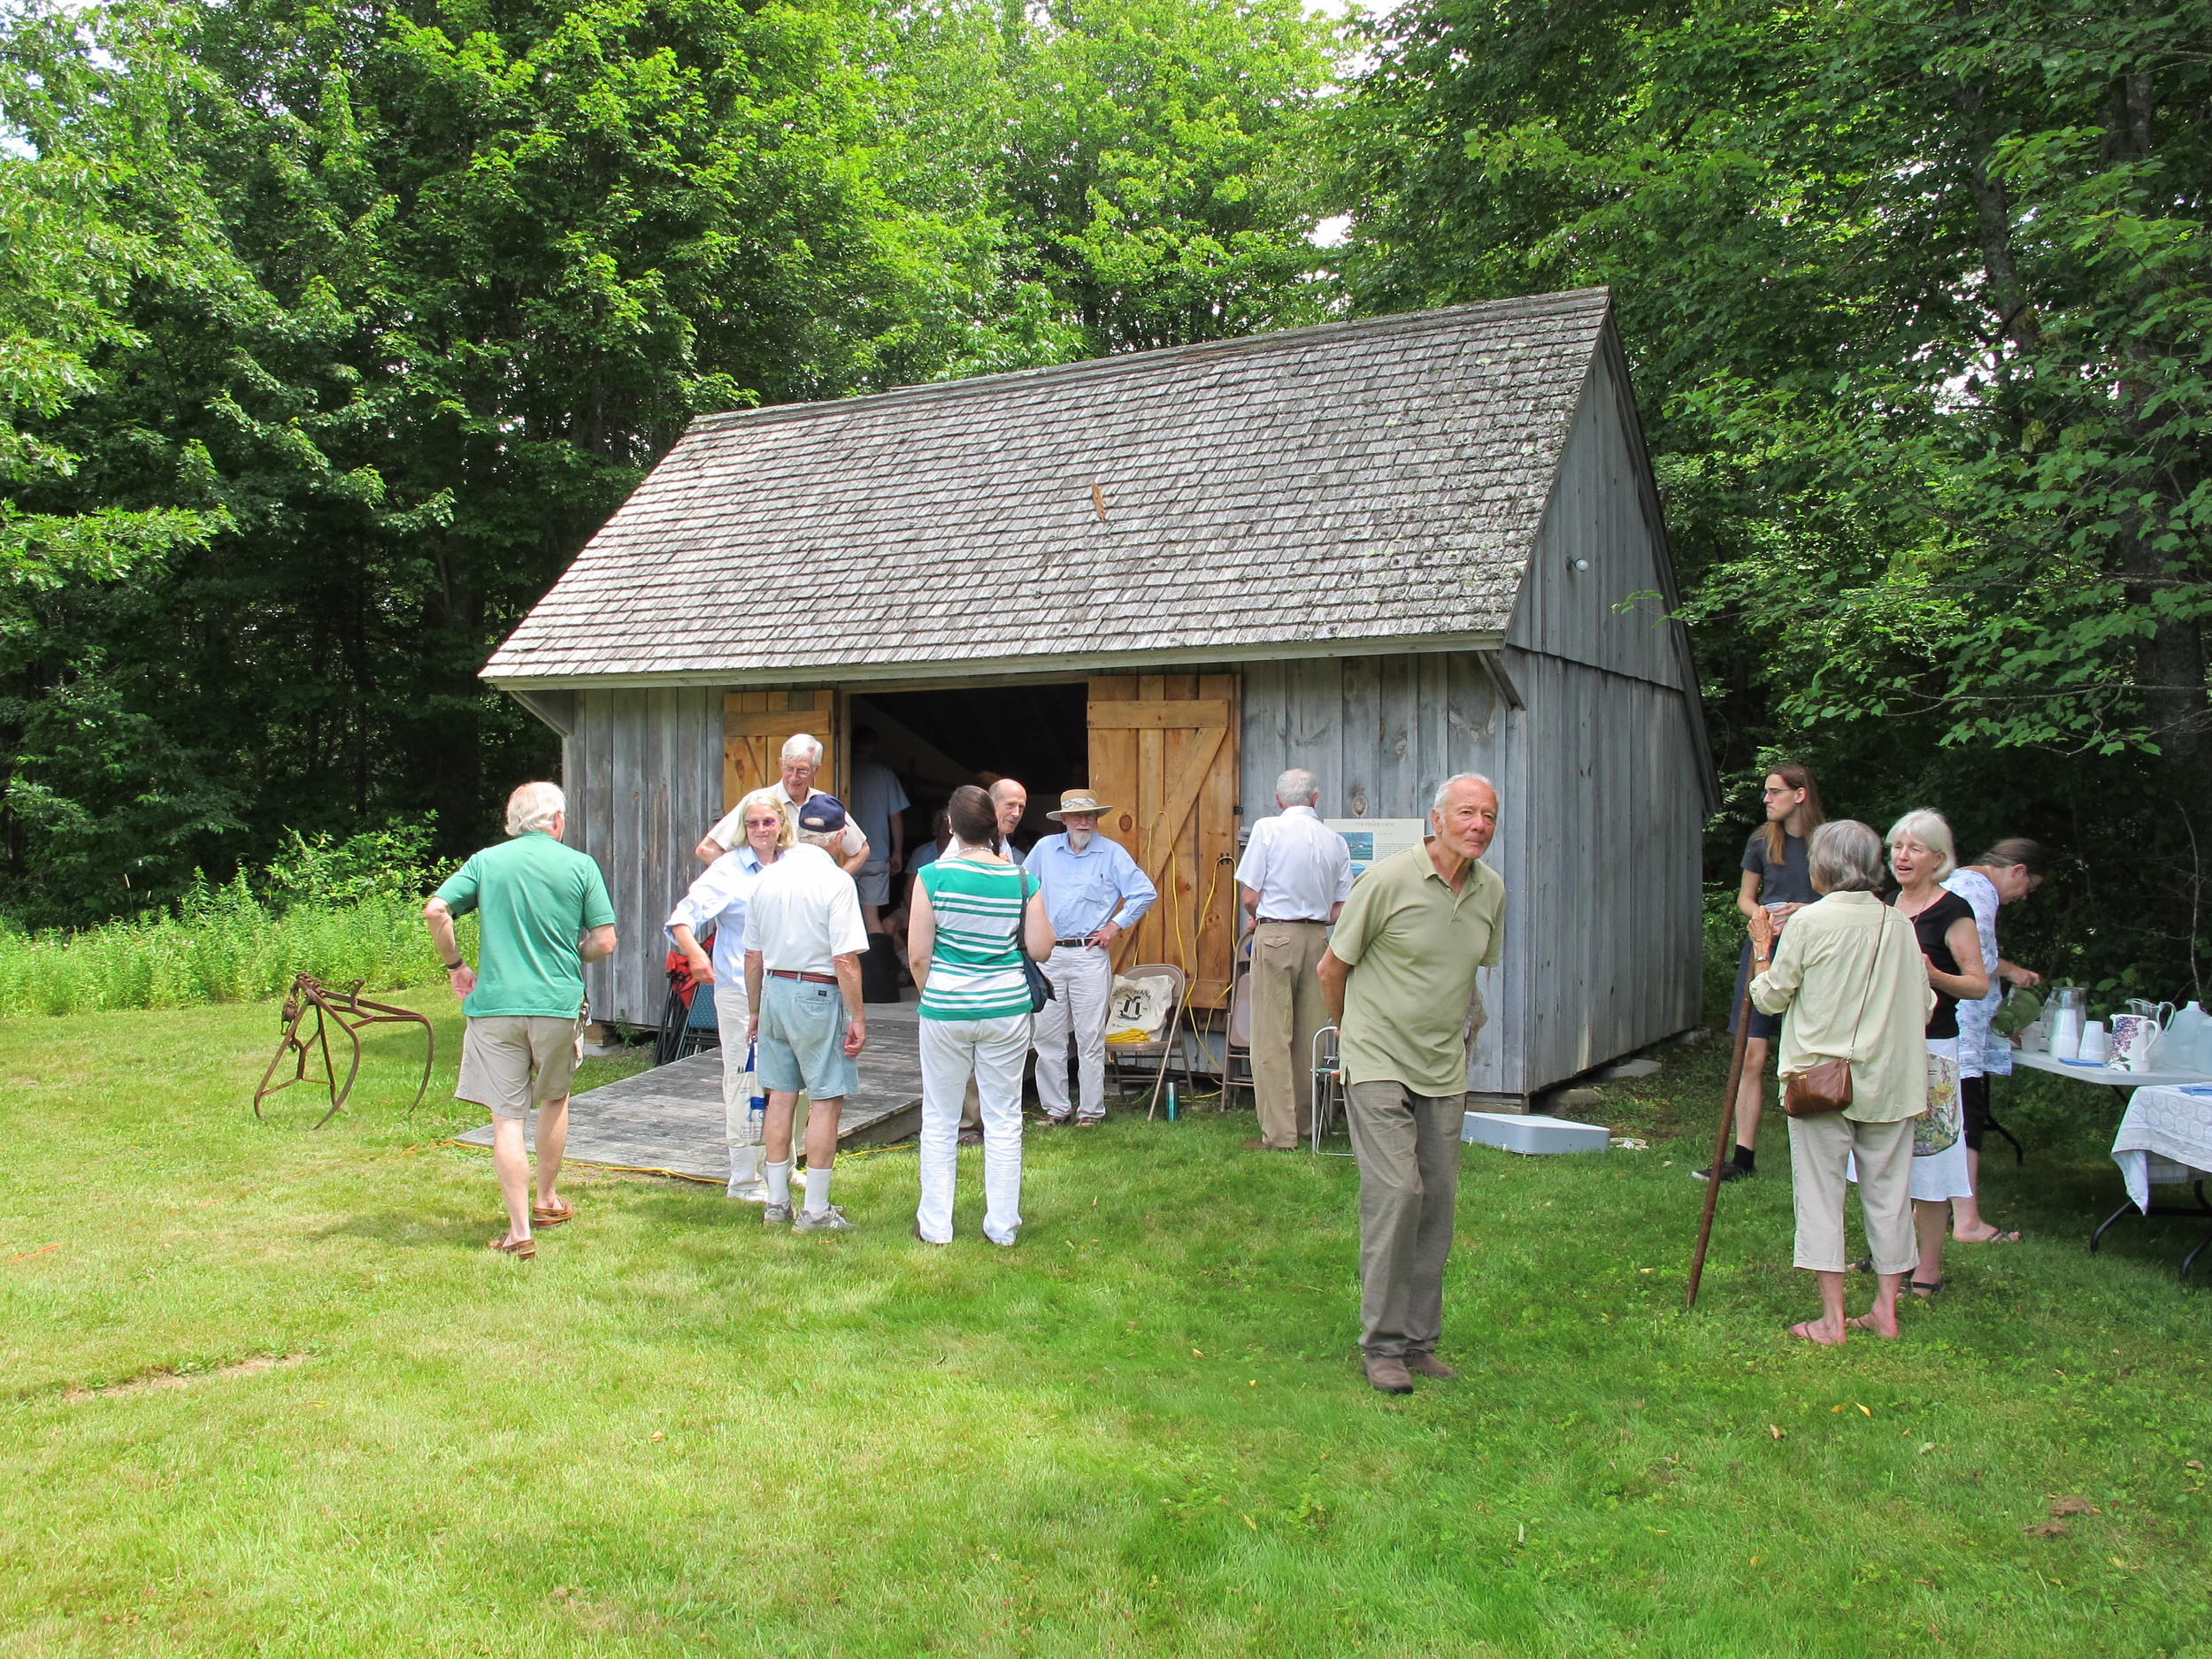 The event took place in and around a small barn donated by the Slaven family.